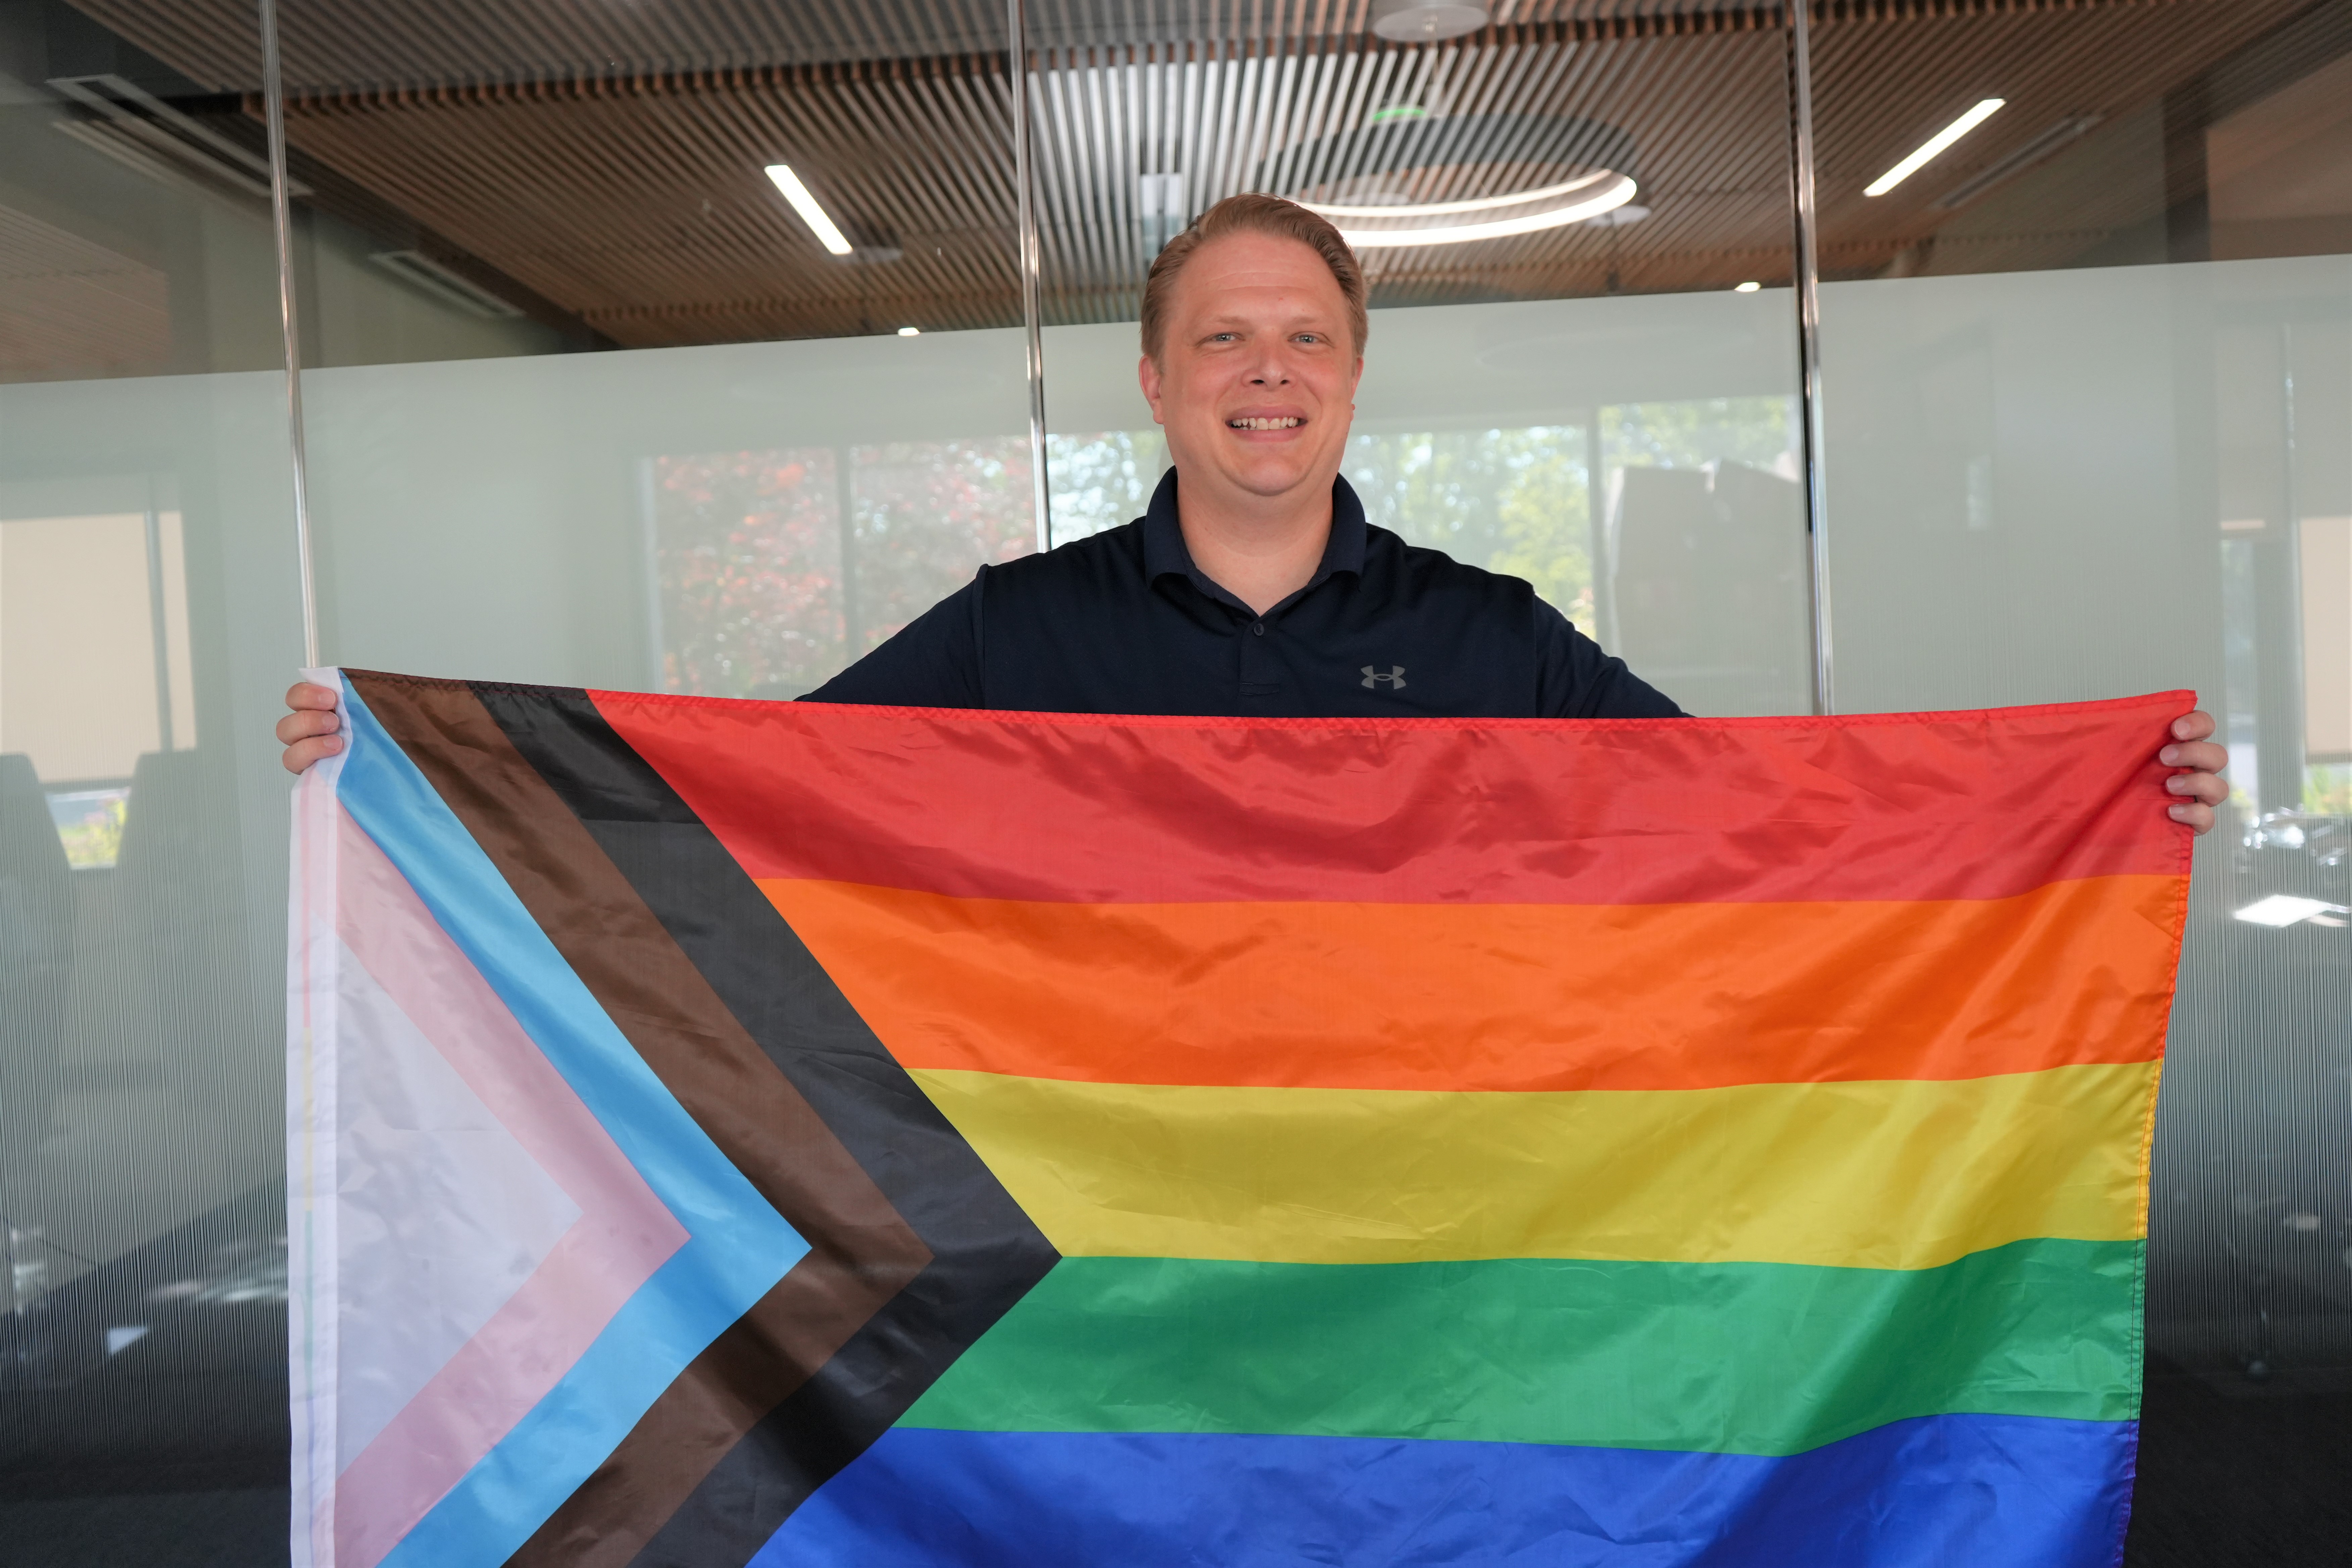 Dr. Allred holding the progressive Pride flag at HealthPoint